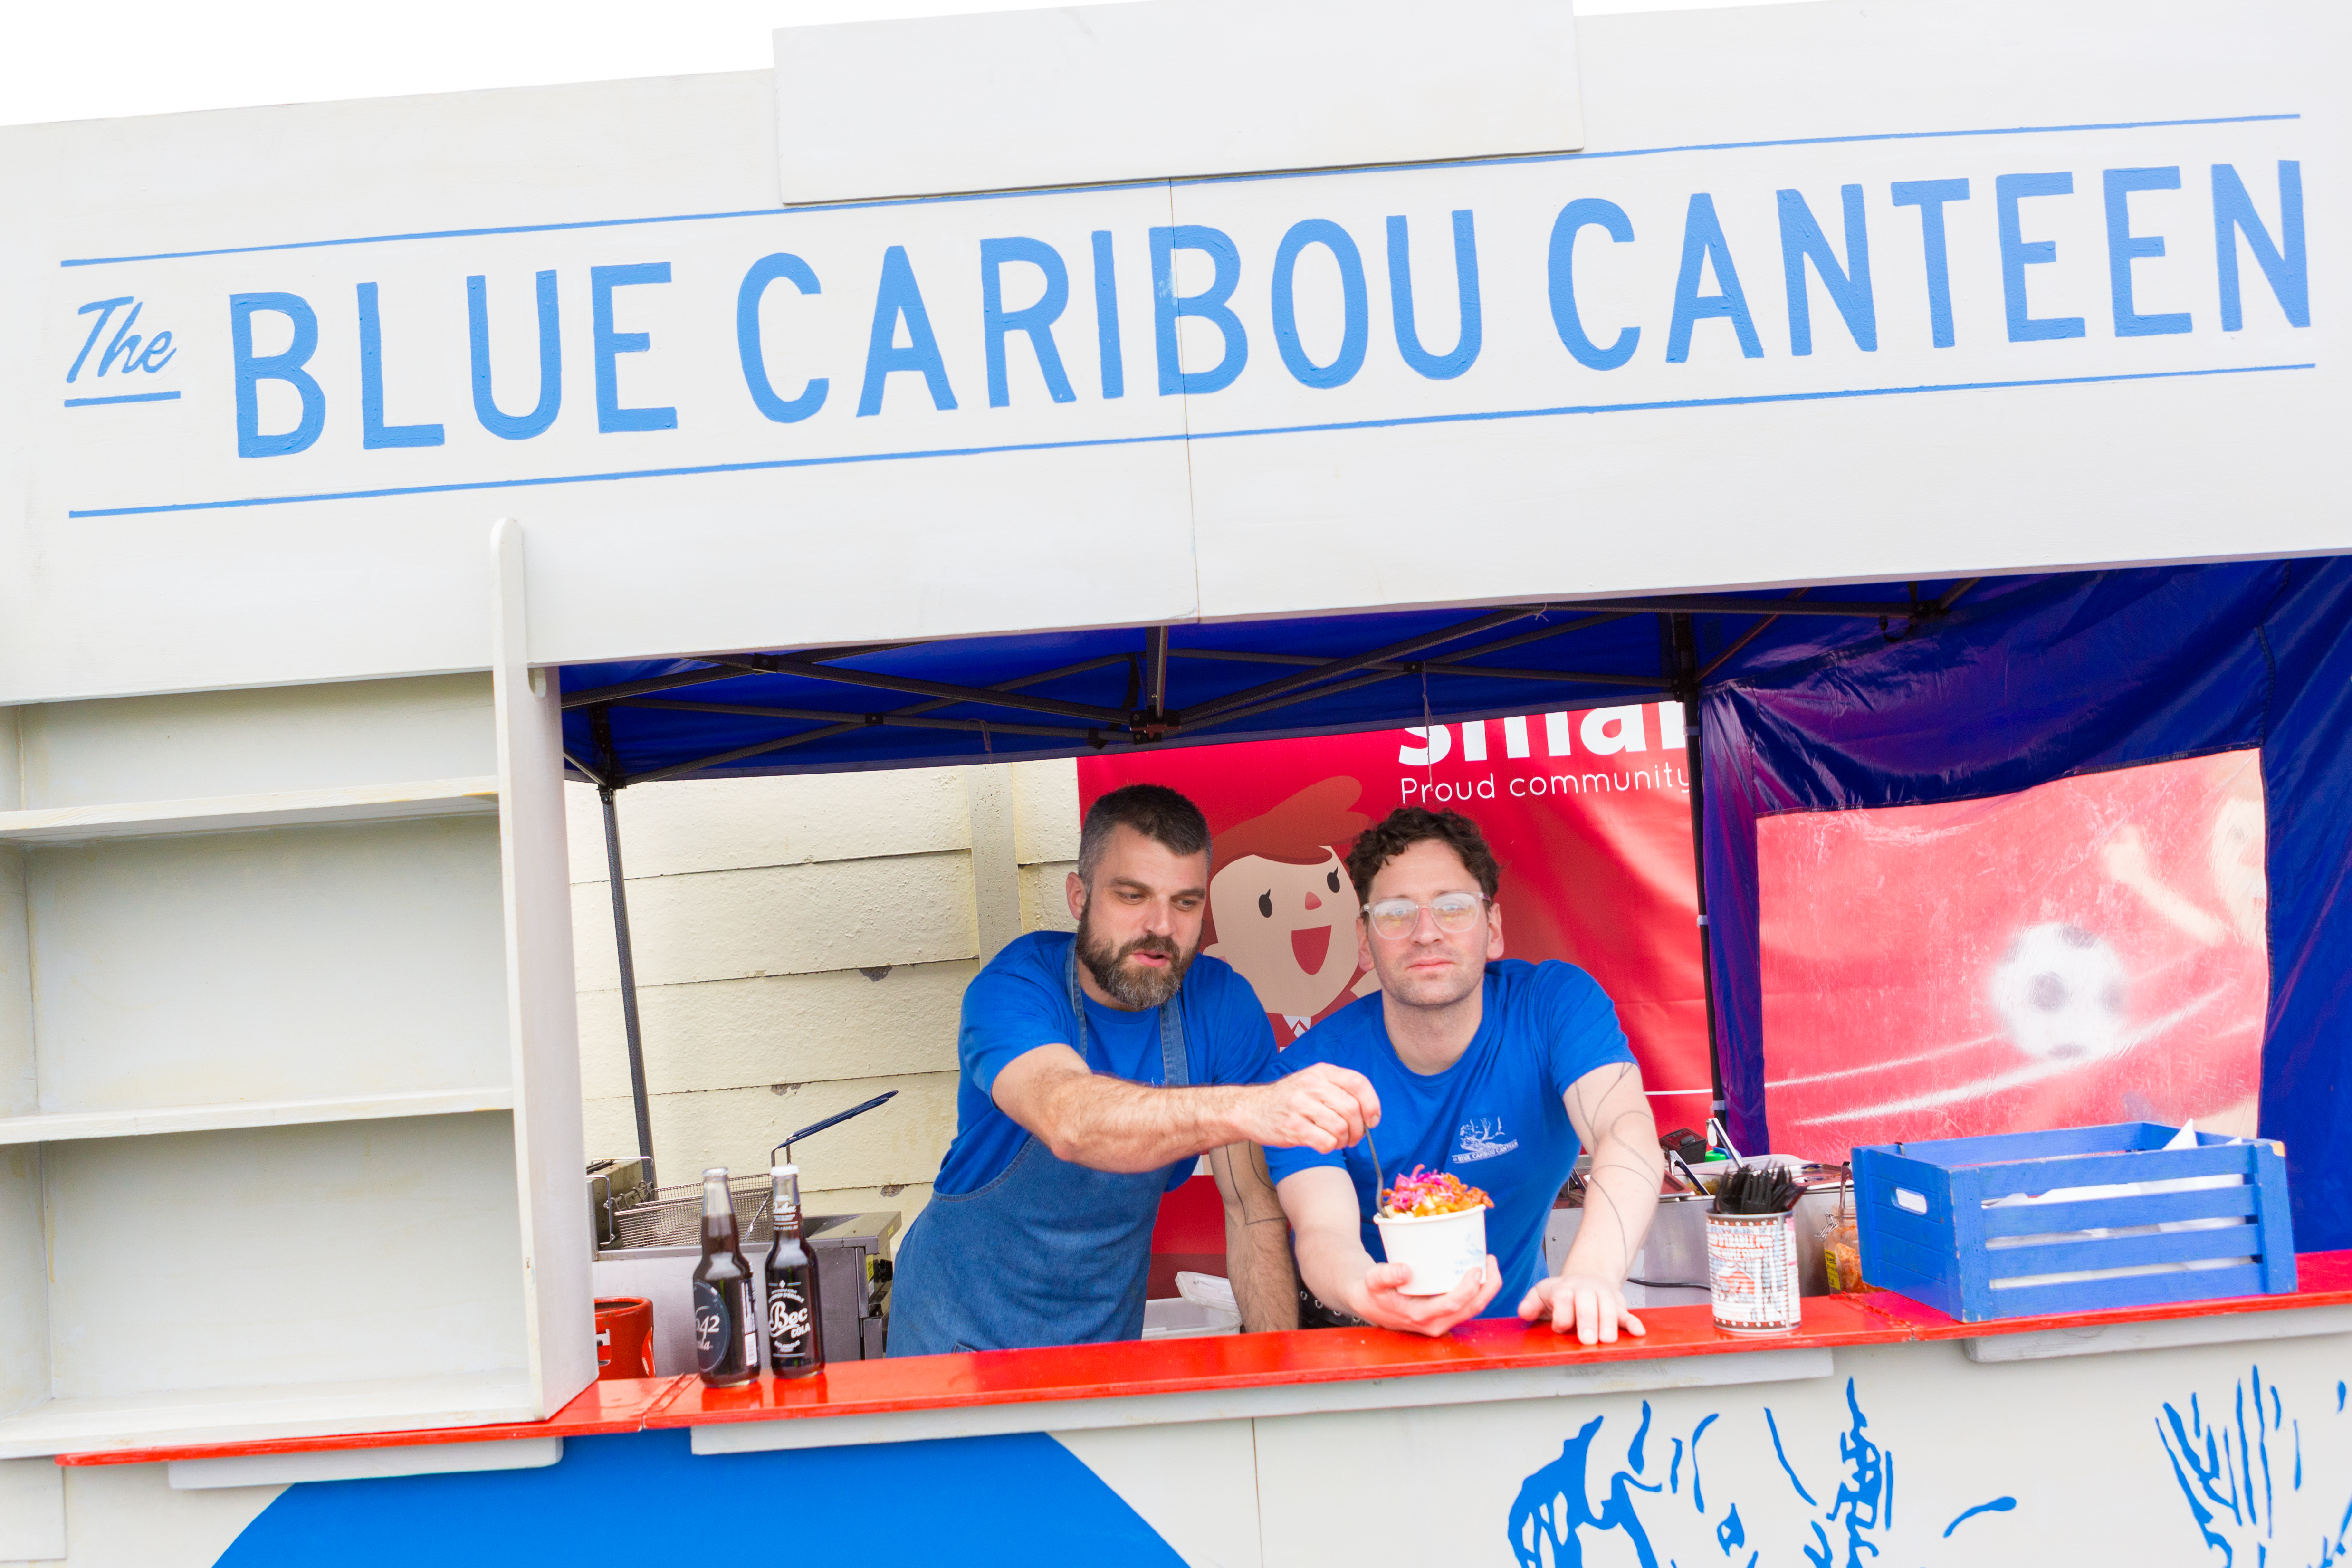 Canadian street food specialists Blue Caribou Canteen